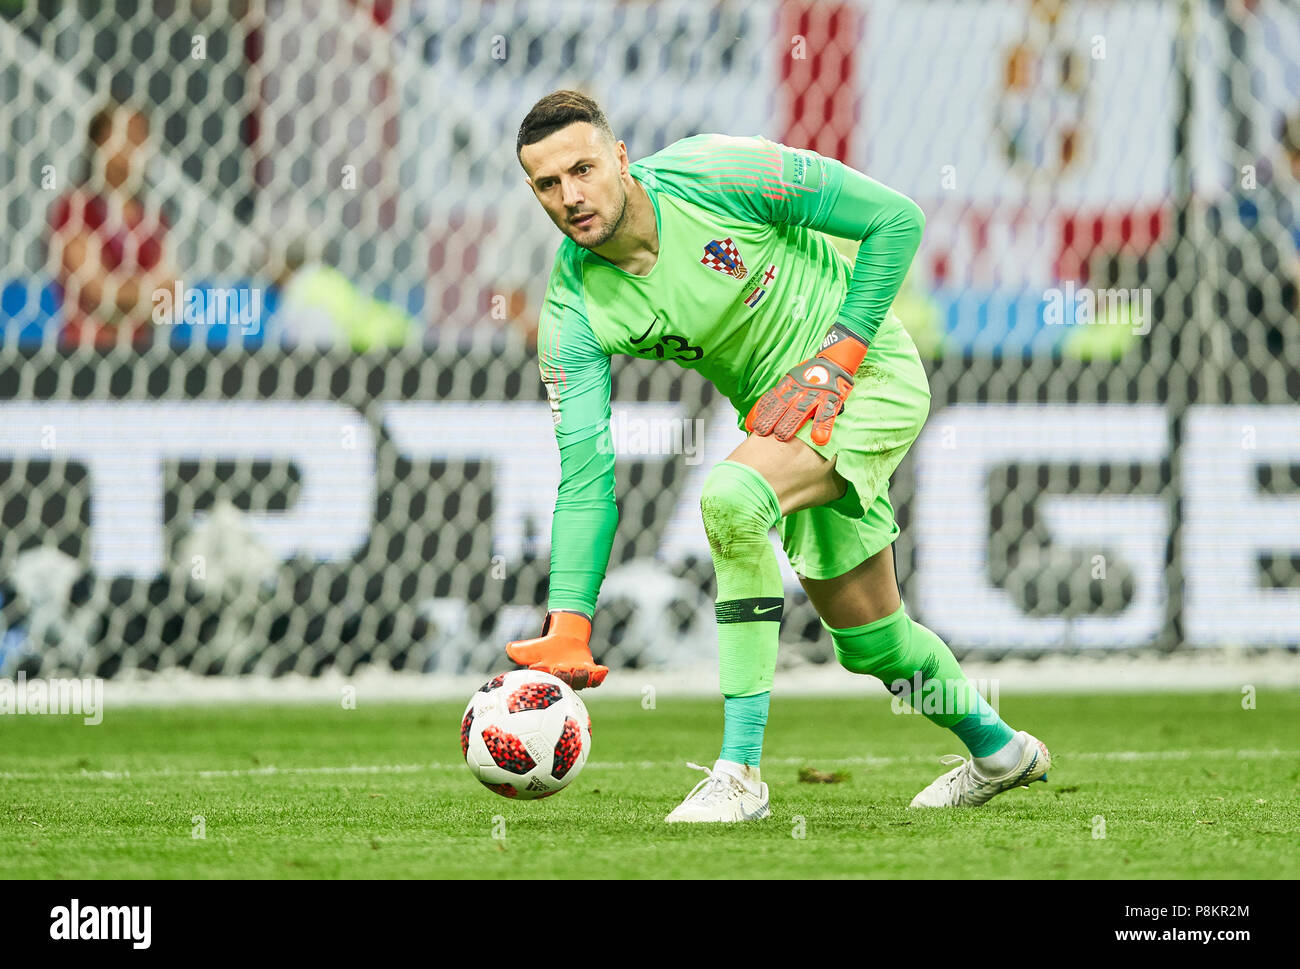 England - Croatia, Soccer, Moscow, July 11, 2018 Daniel SUBASIC, Croatia Nr.23  drives, controls the ball, action, full-size, Single action with ball, full body, whole figure, cutout, single shots, ball treatment, pick-up, header, cut out,  ENGLAND  - CROATIA 1-2 Football FIFA WORLD CUP 2018 RUSSIA, Semifinal, Season 2018/2019,  July 11, 2018 in Moscow, Russia. © Peter Schatz / Alamy Live News Stock Photo